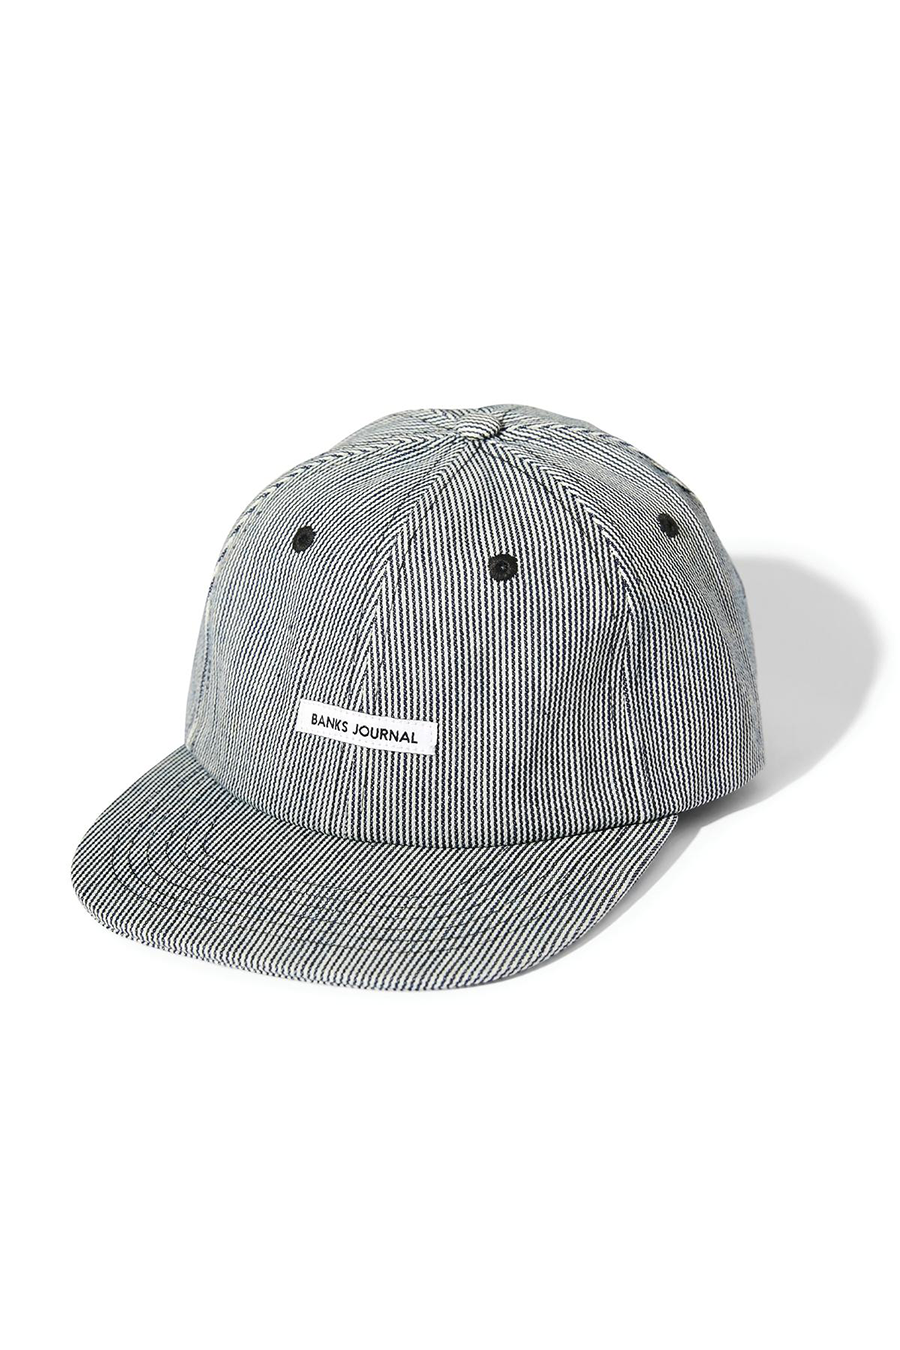 Formation Hat | Dirty Black - Main Image Number 1 of 1